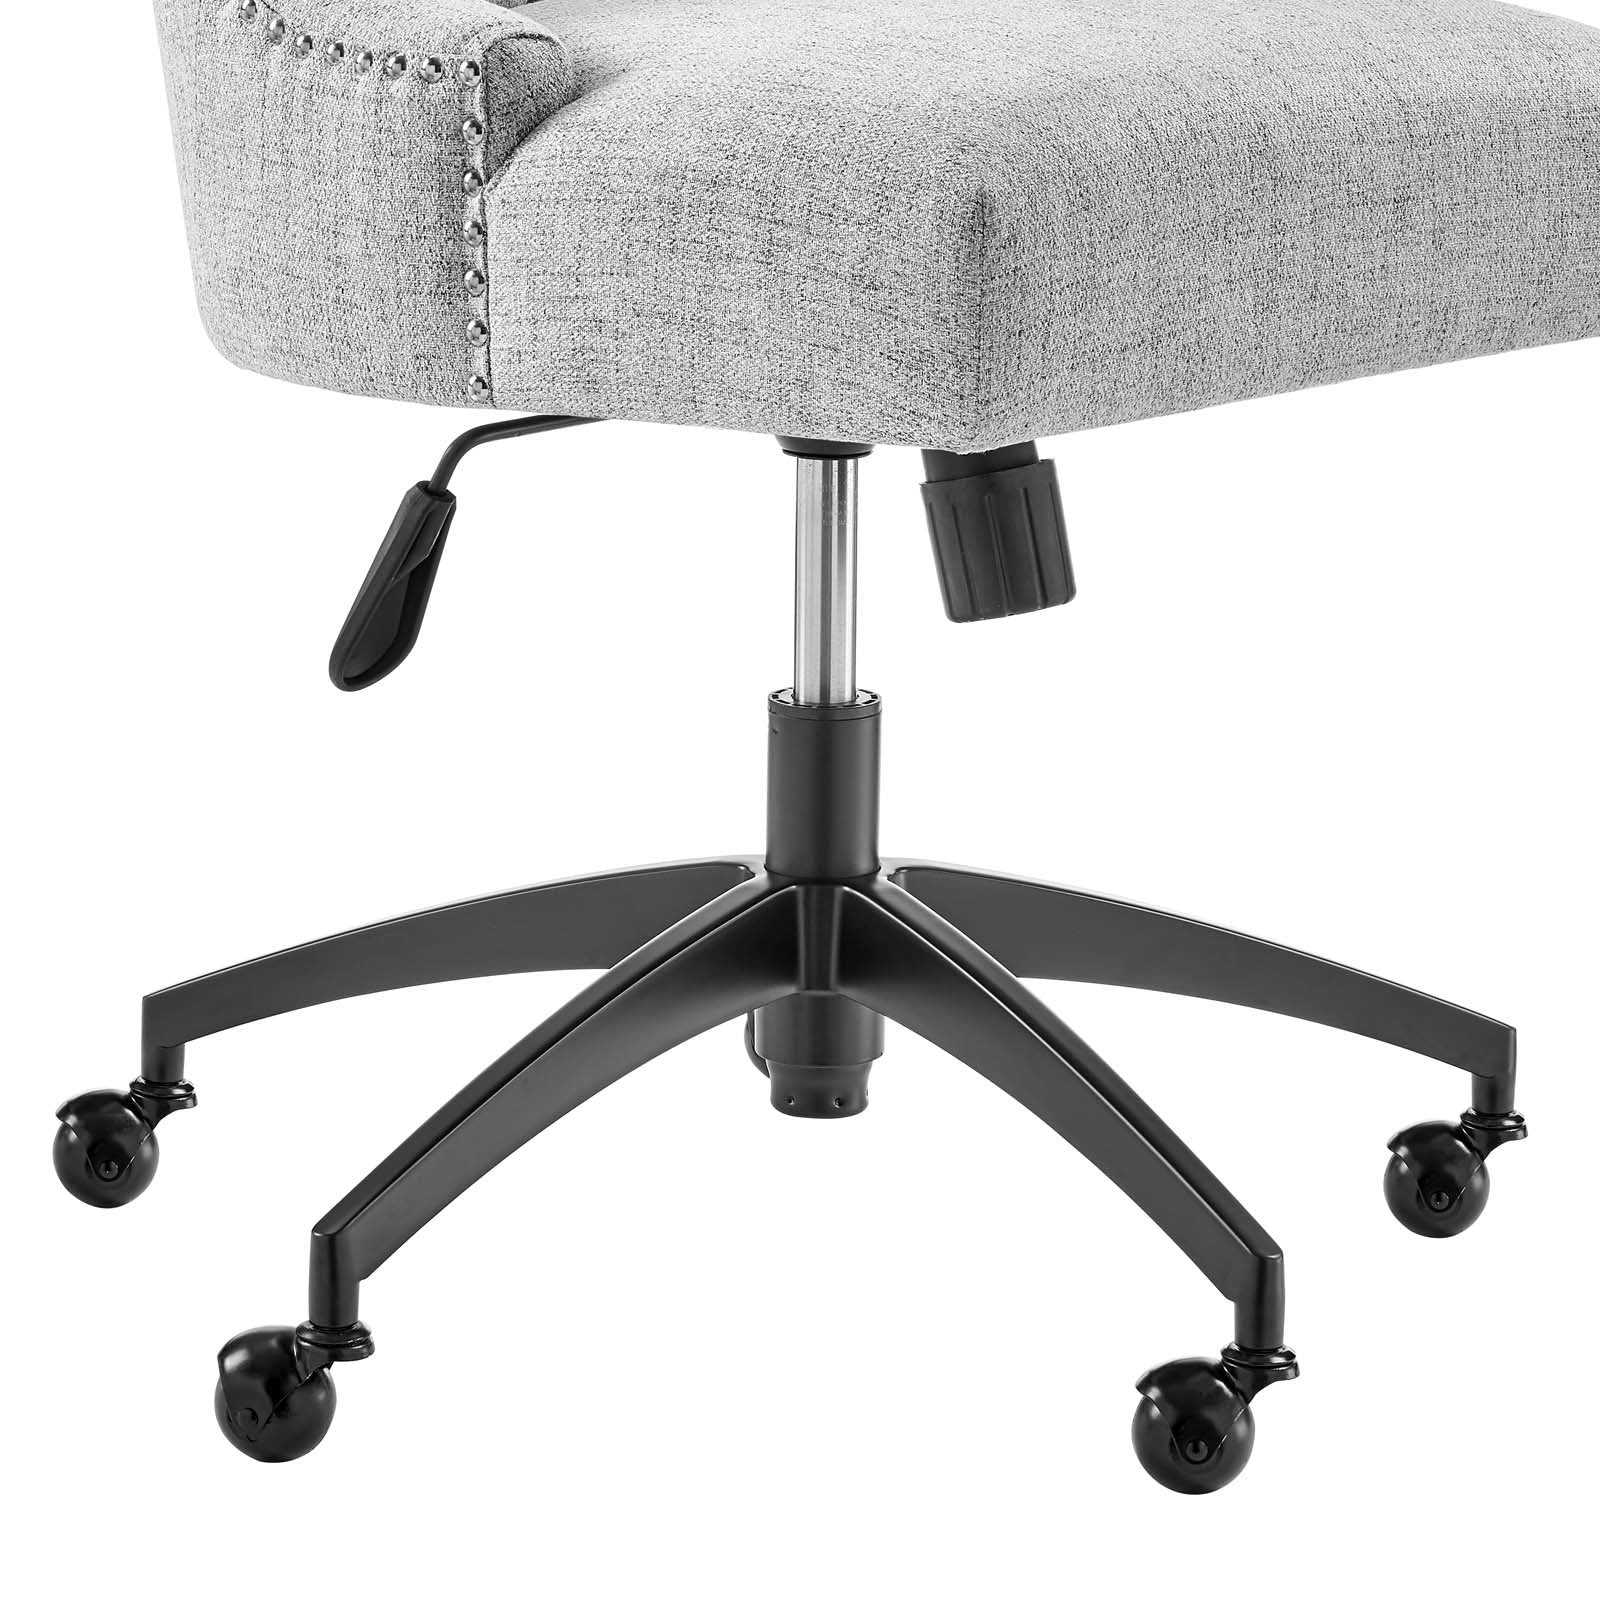 Empower Channel Tufted Fabric Office Chair